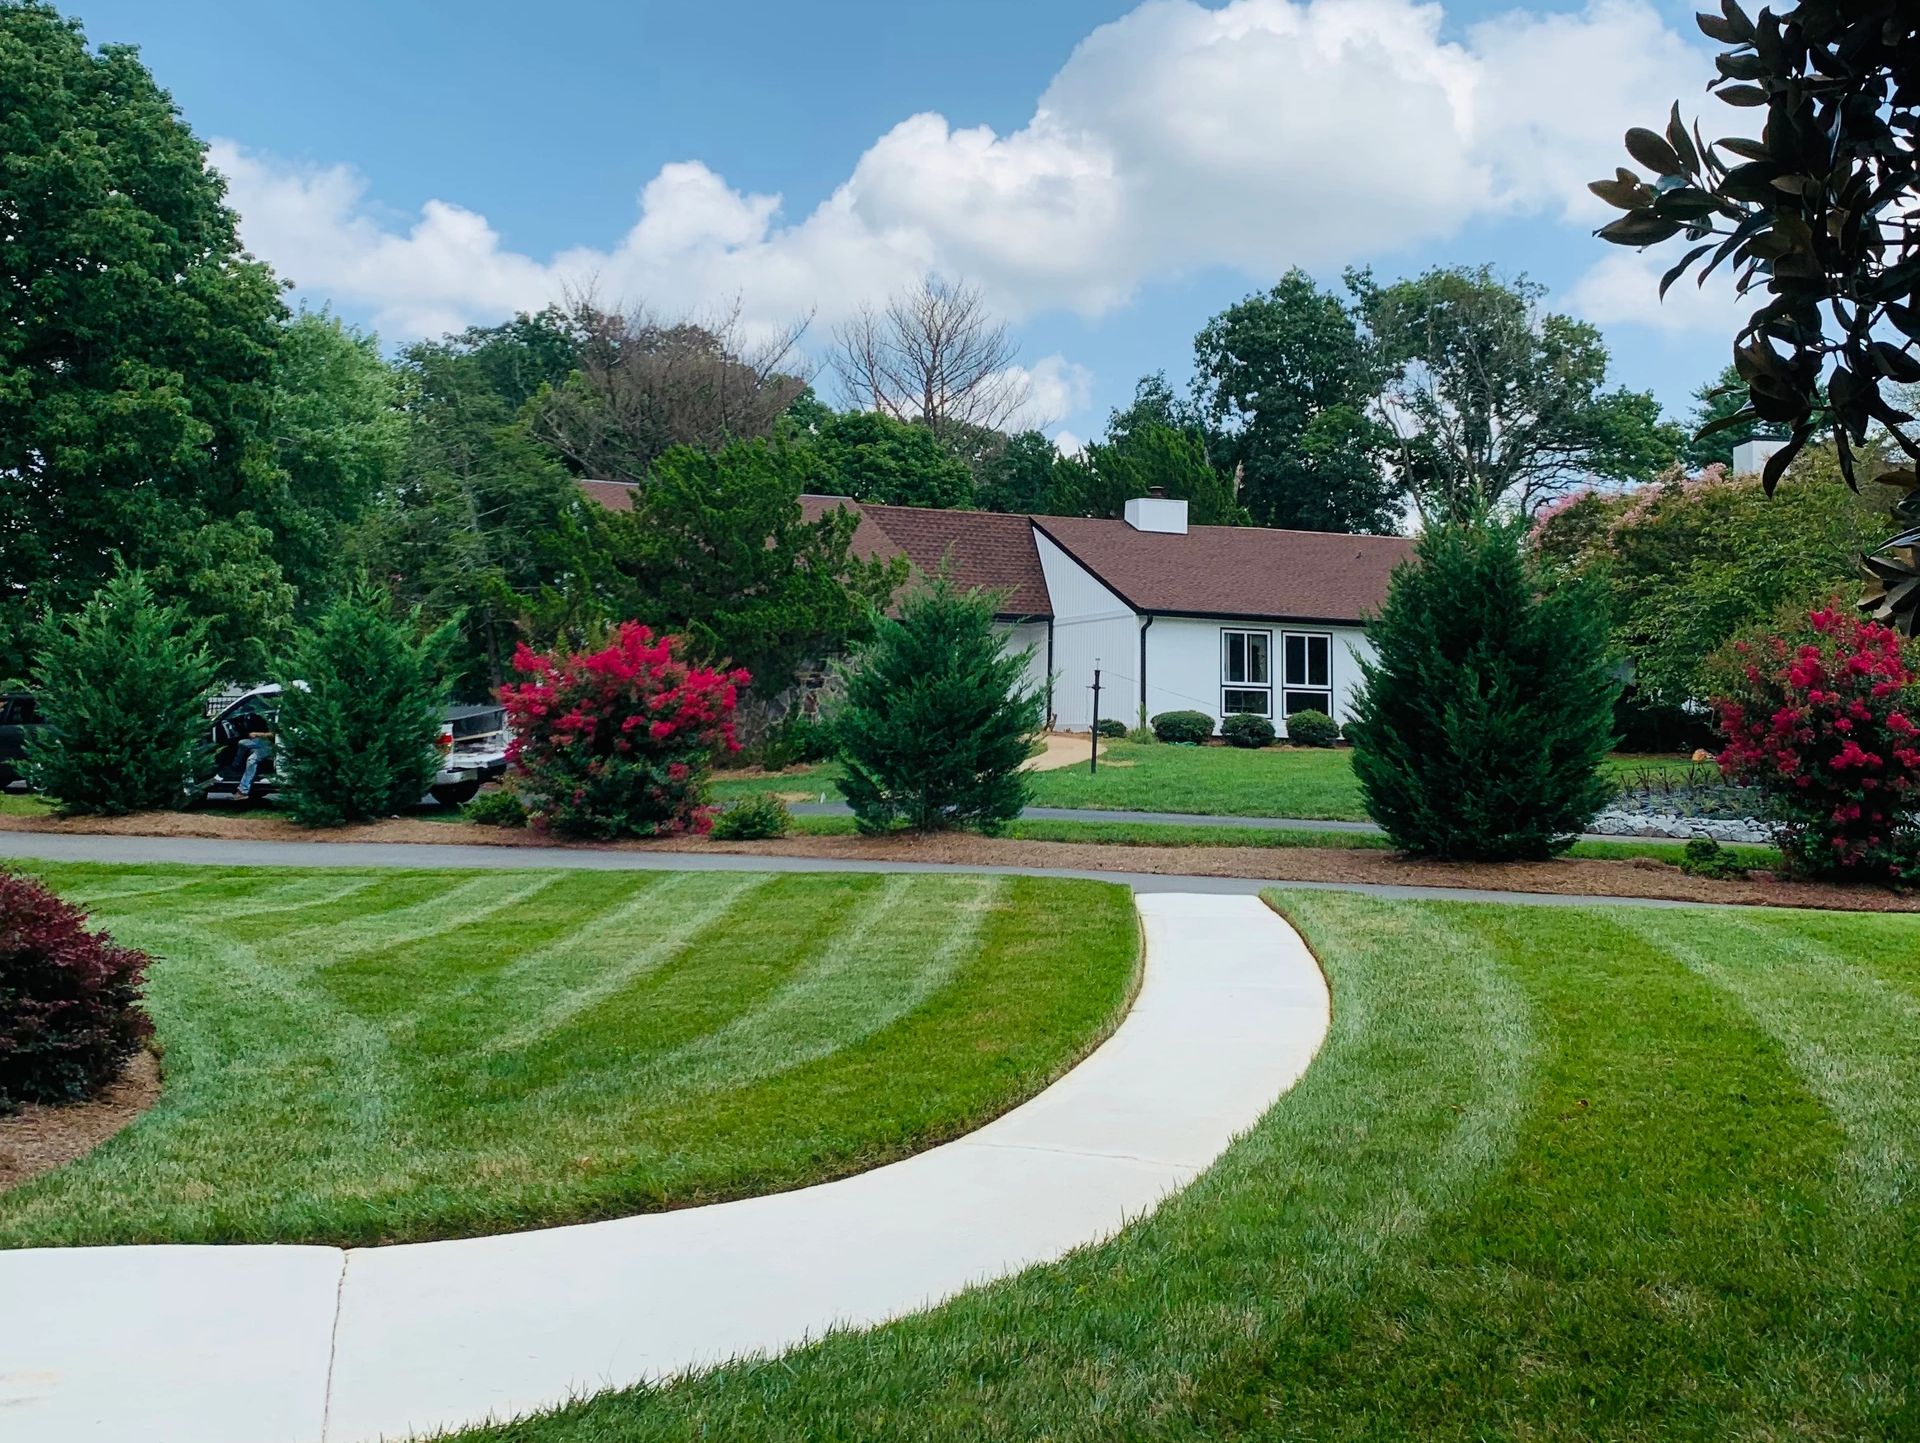 A perfectly manicured lawn with alternating light and dark green stripes, a curved concrete walkway 